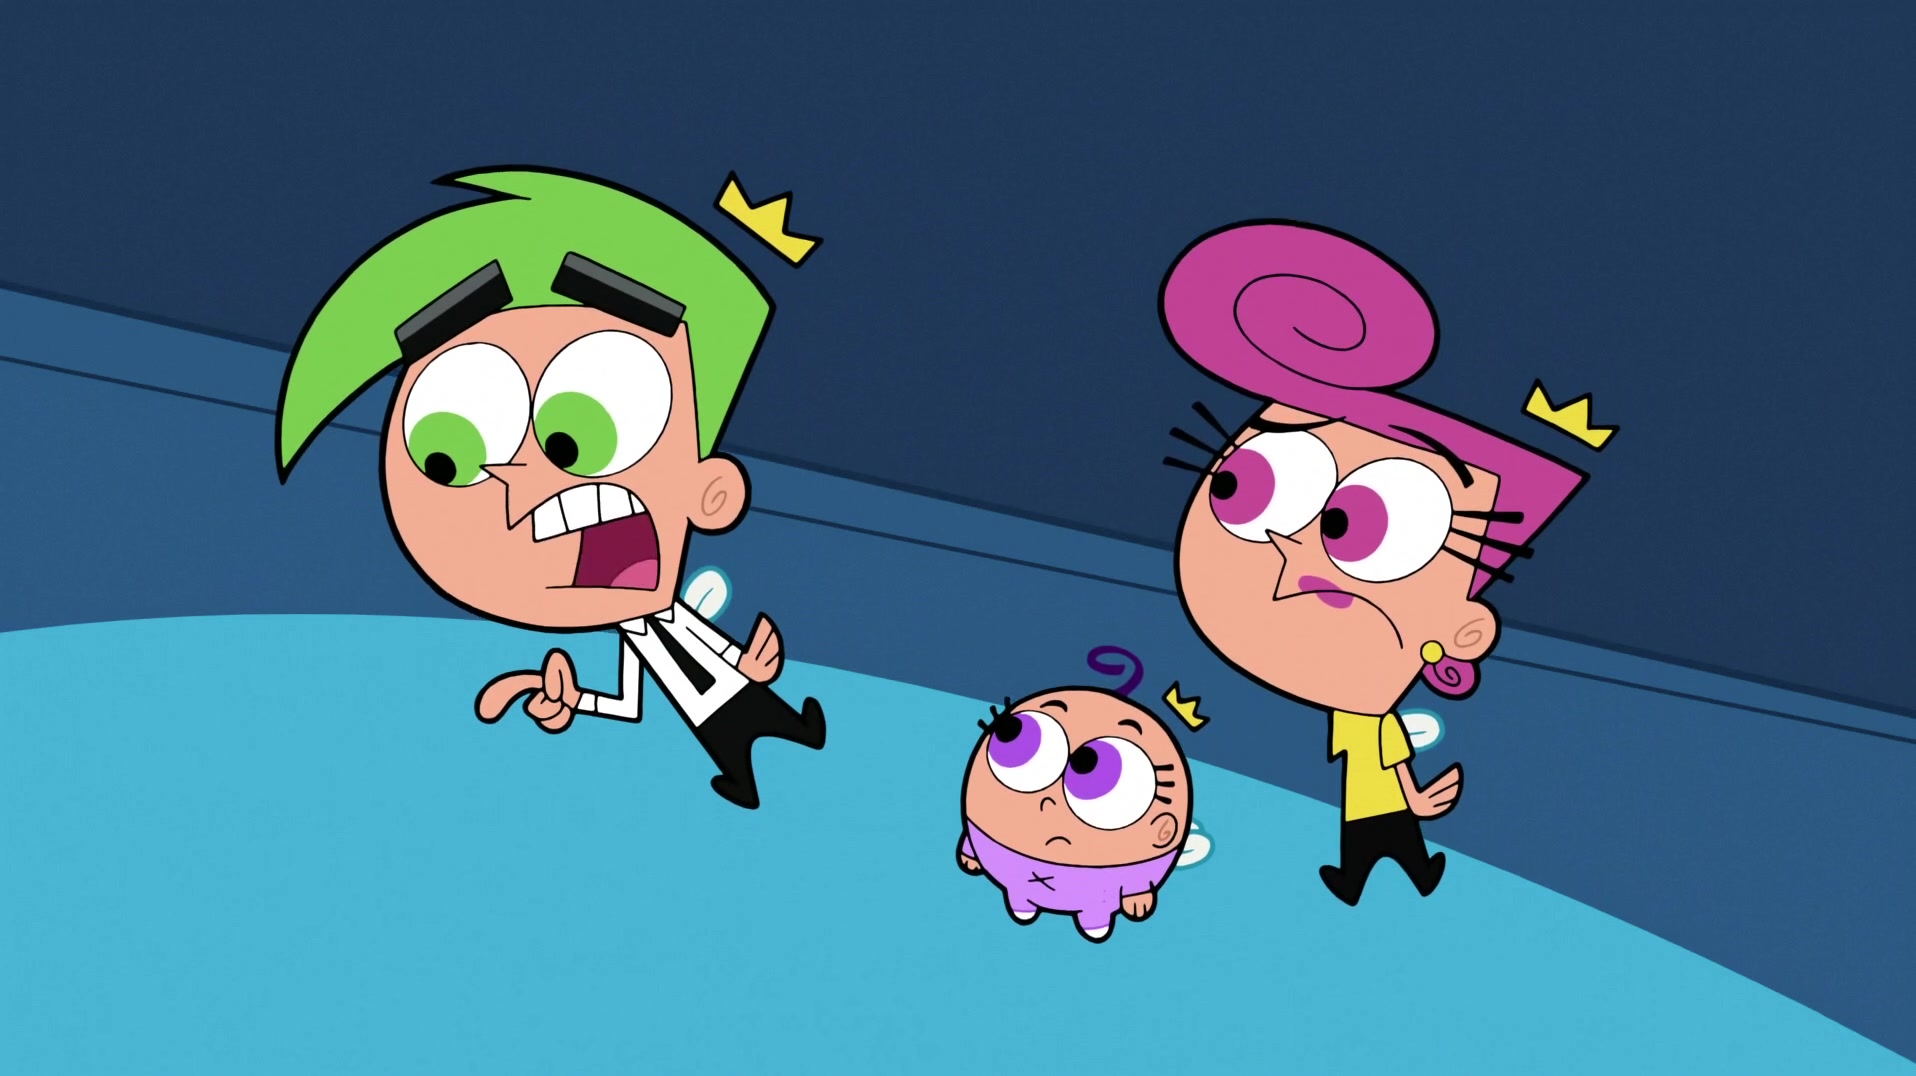 If You Weren’t a ’00s Kid You’ve Got No Chance of Naming These Cartoons The Fairly OddParents